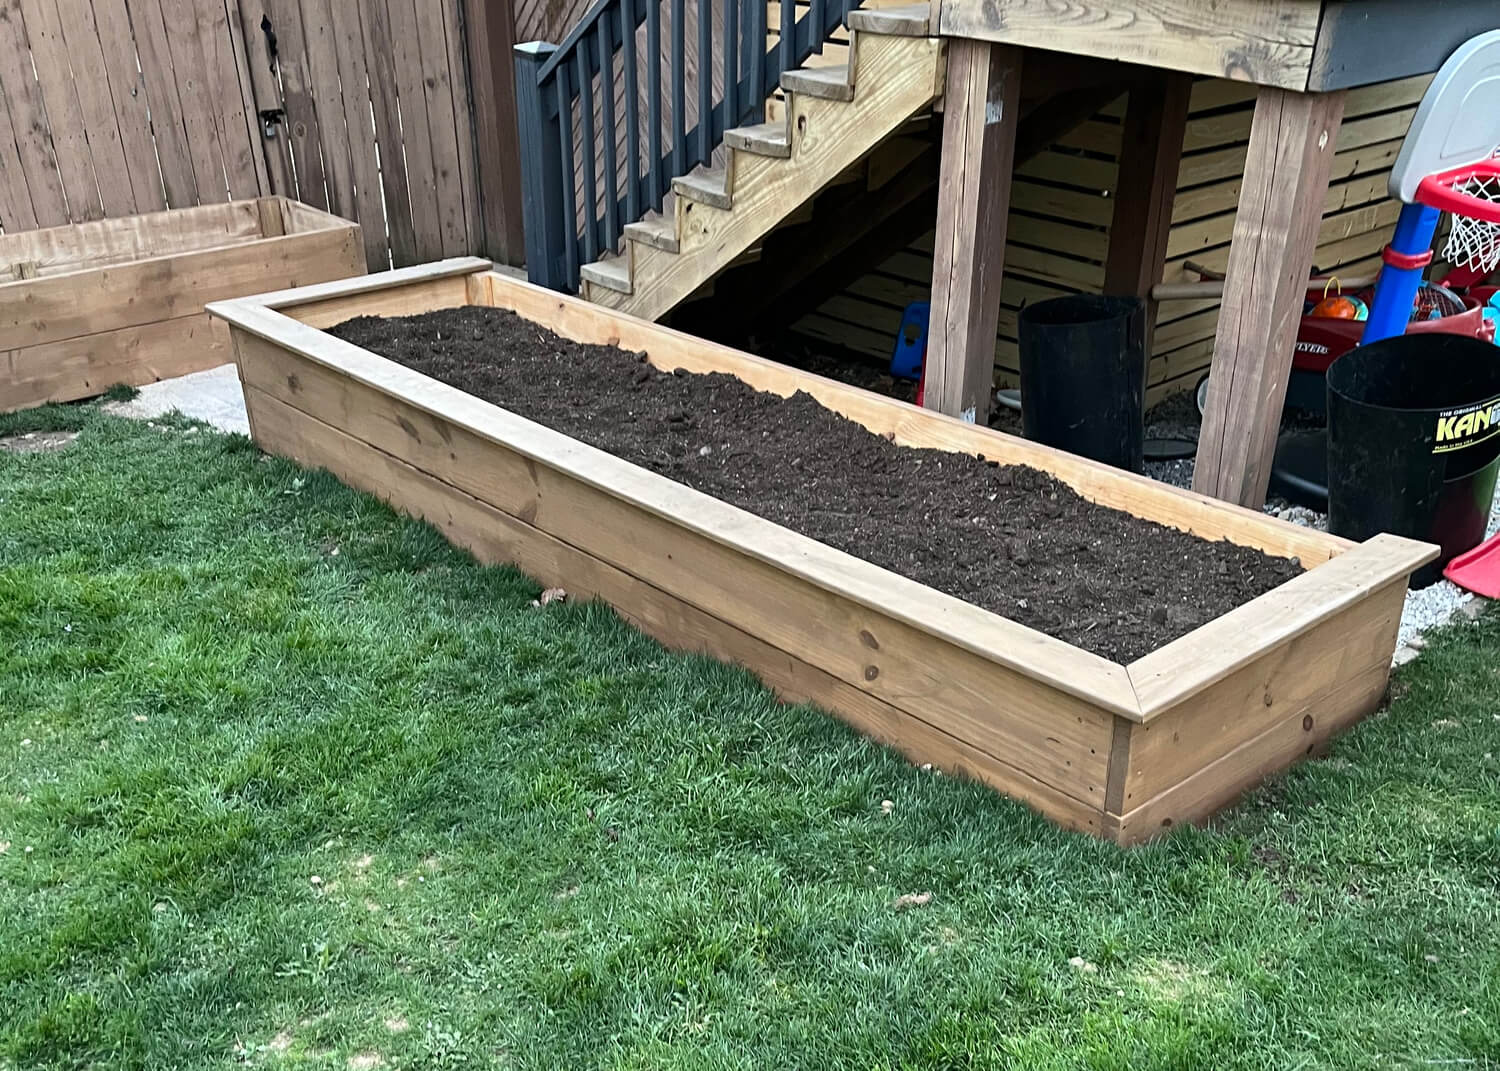 How to make a raised garden bed